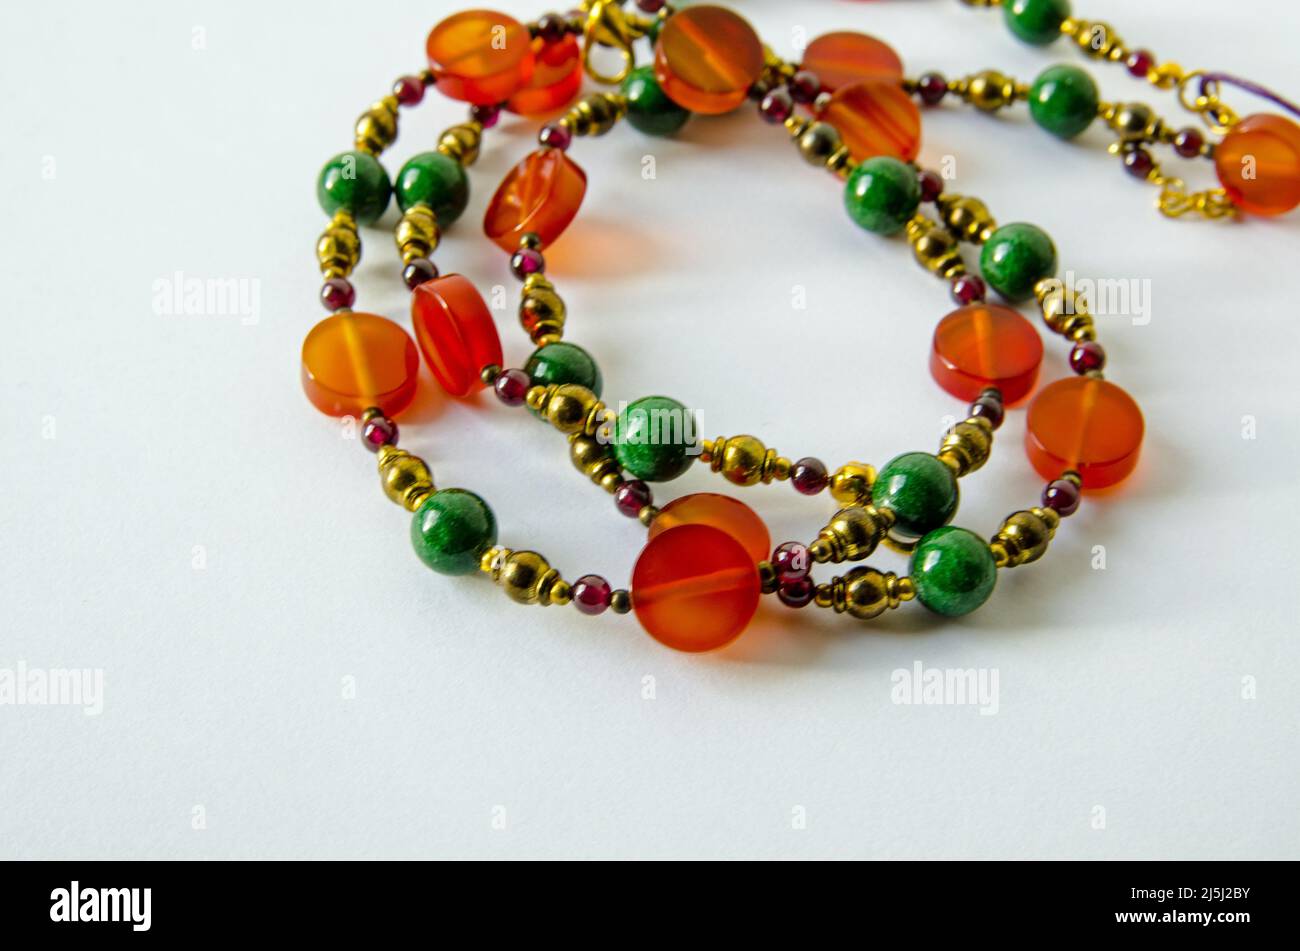 Handmade necklace crafted from beads of orange agate, red garnet and green quartzite intersperced with brass metal beads. Stock Photo